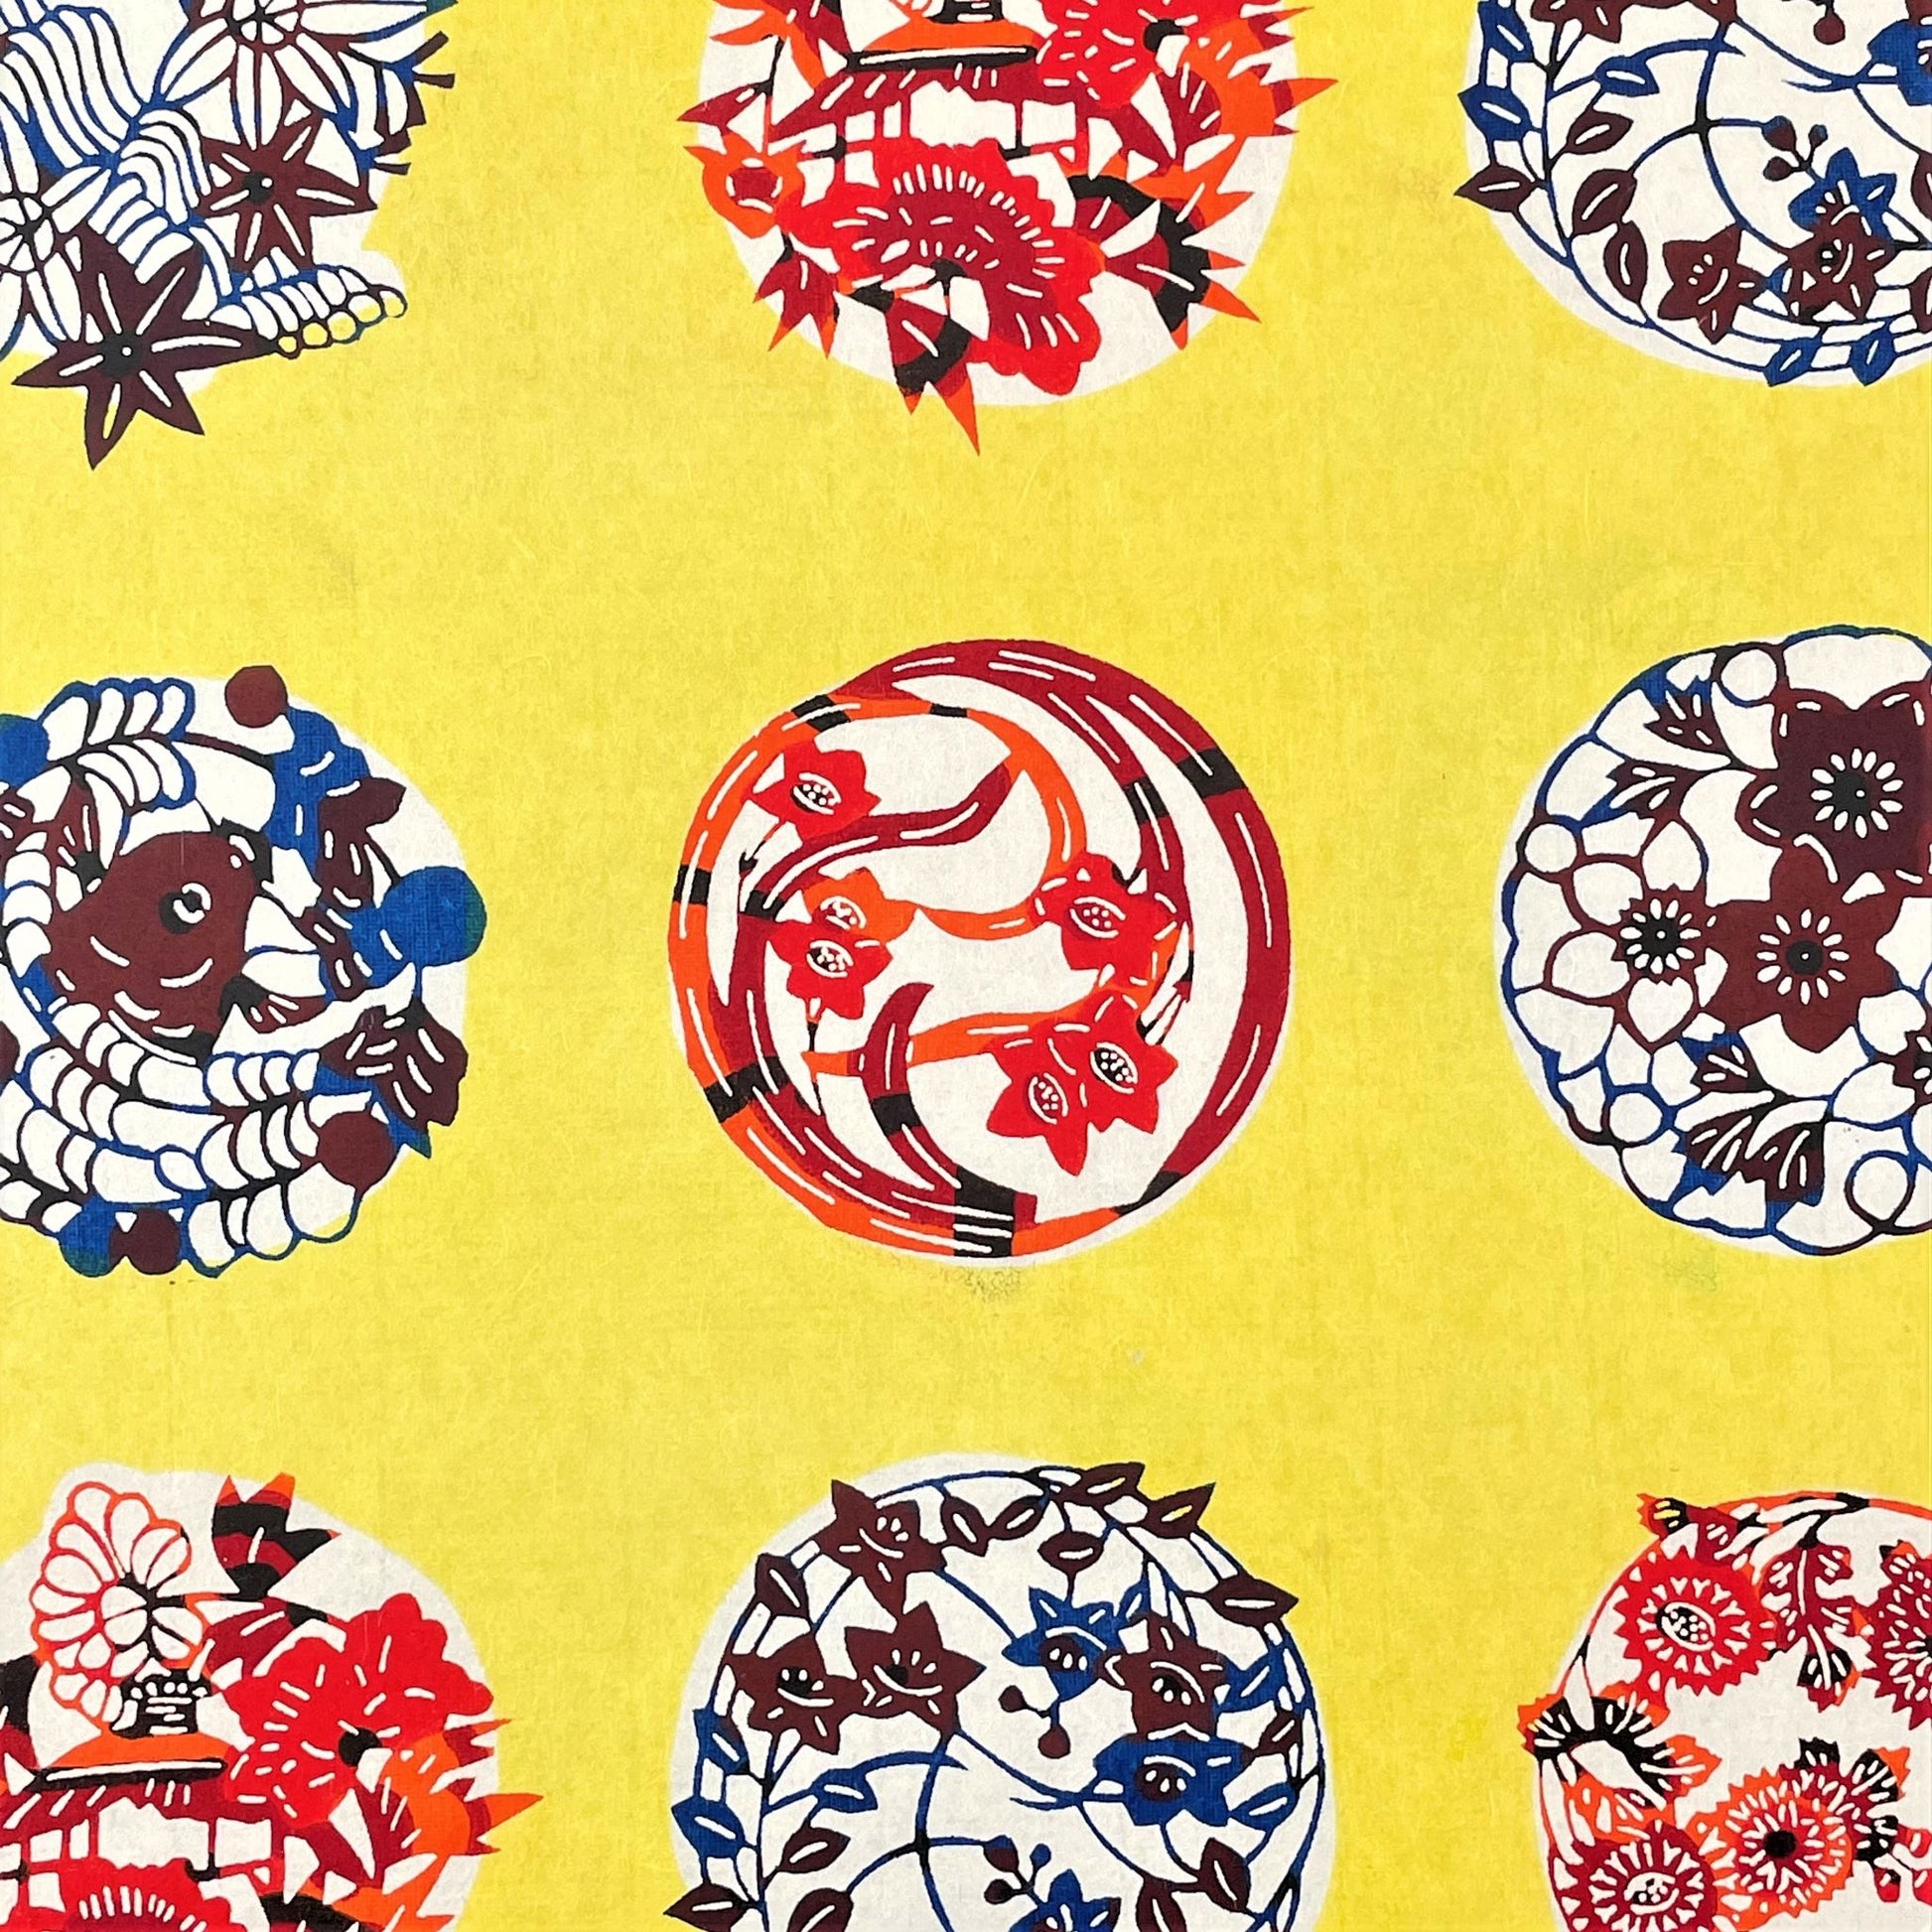 japanese stencil-dyed handmade paper with traditional botanical circles pattern on yellow backdrop